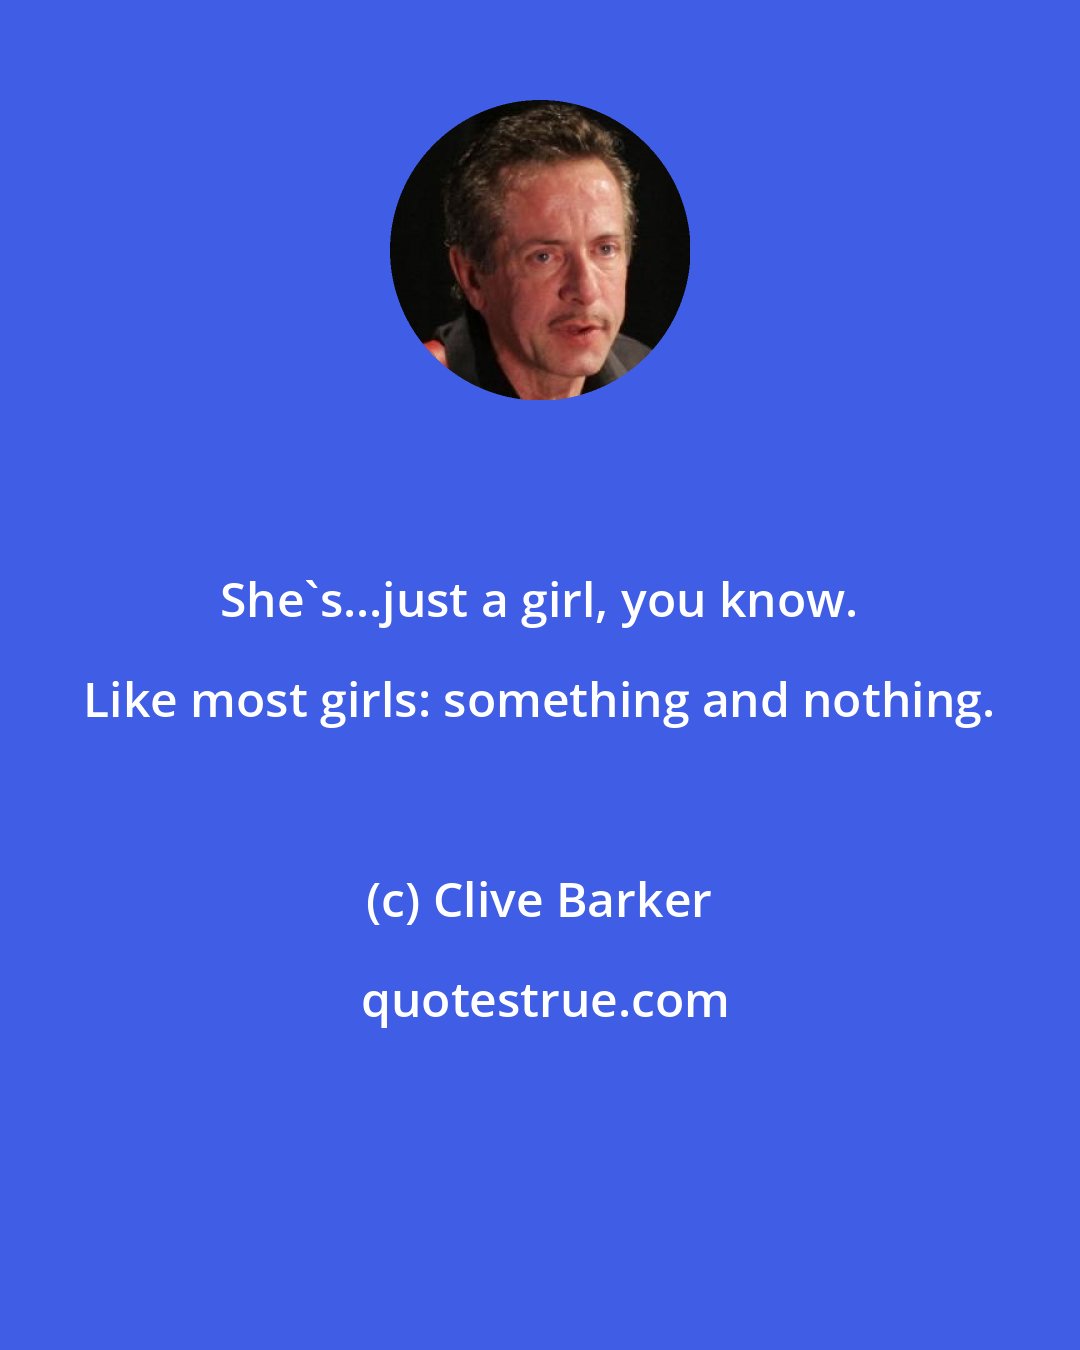 Clive Barker: She's...just a girl, you know. Like most girls: something and nothing.